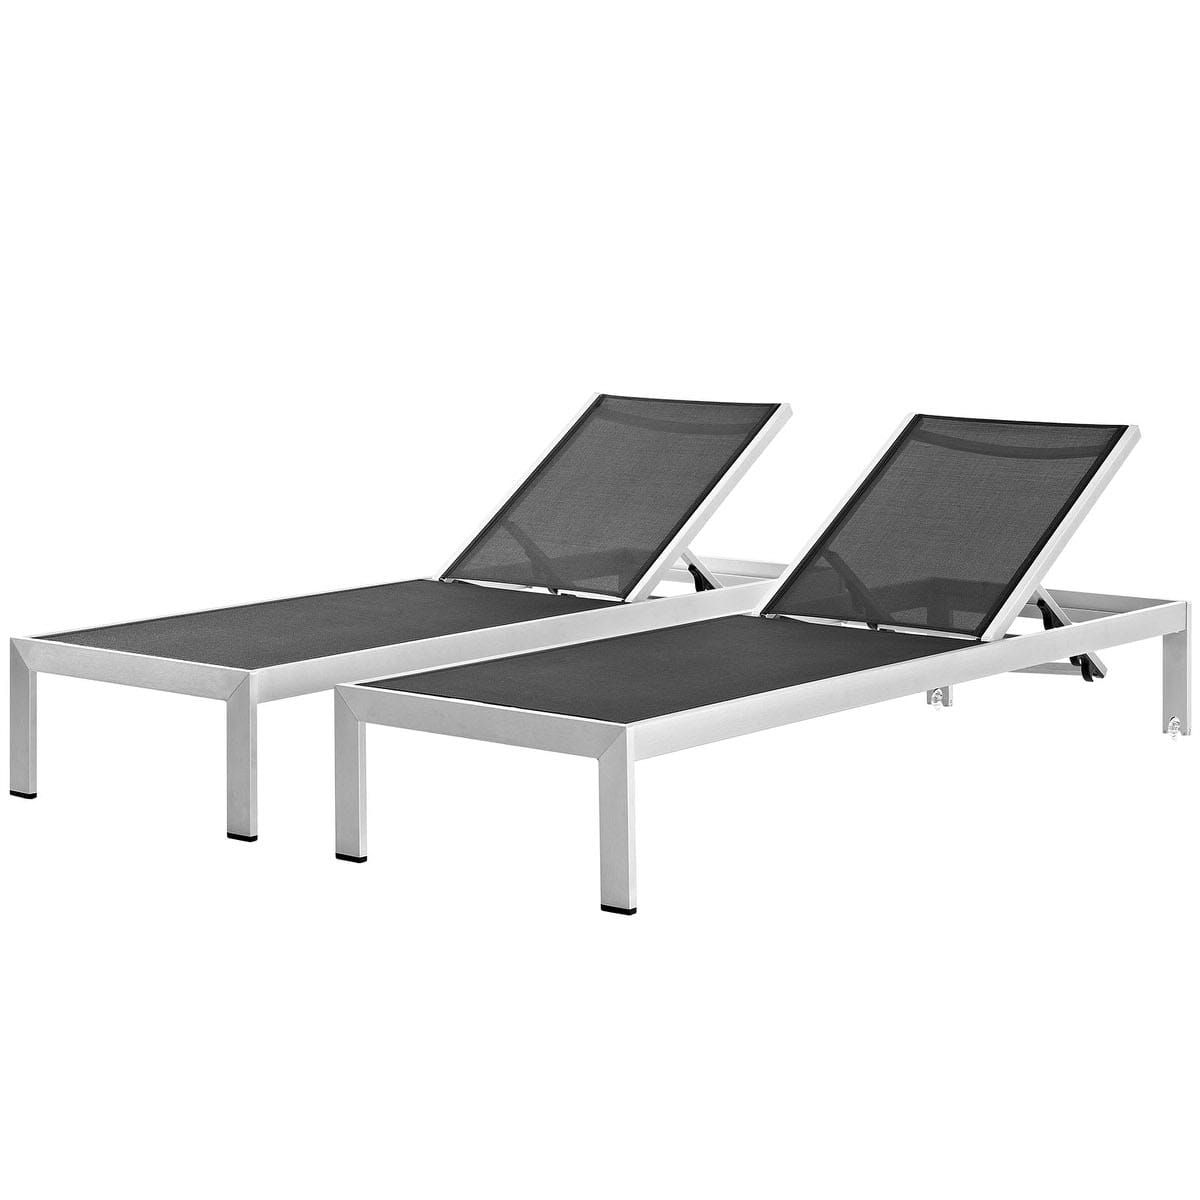 Shore Aluminum Outdoor Chaises Pertaining To 2020 Shore Set Of 2 Outdoor Patio Aluminum Chaise Silver Blackmodern Living (View 14 of 25)